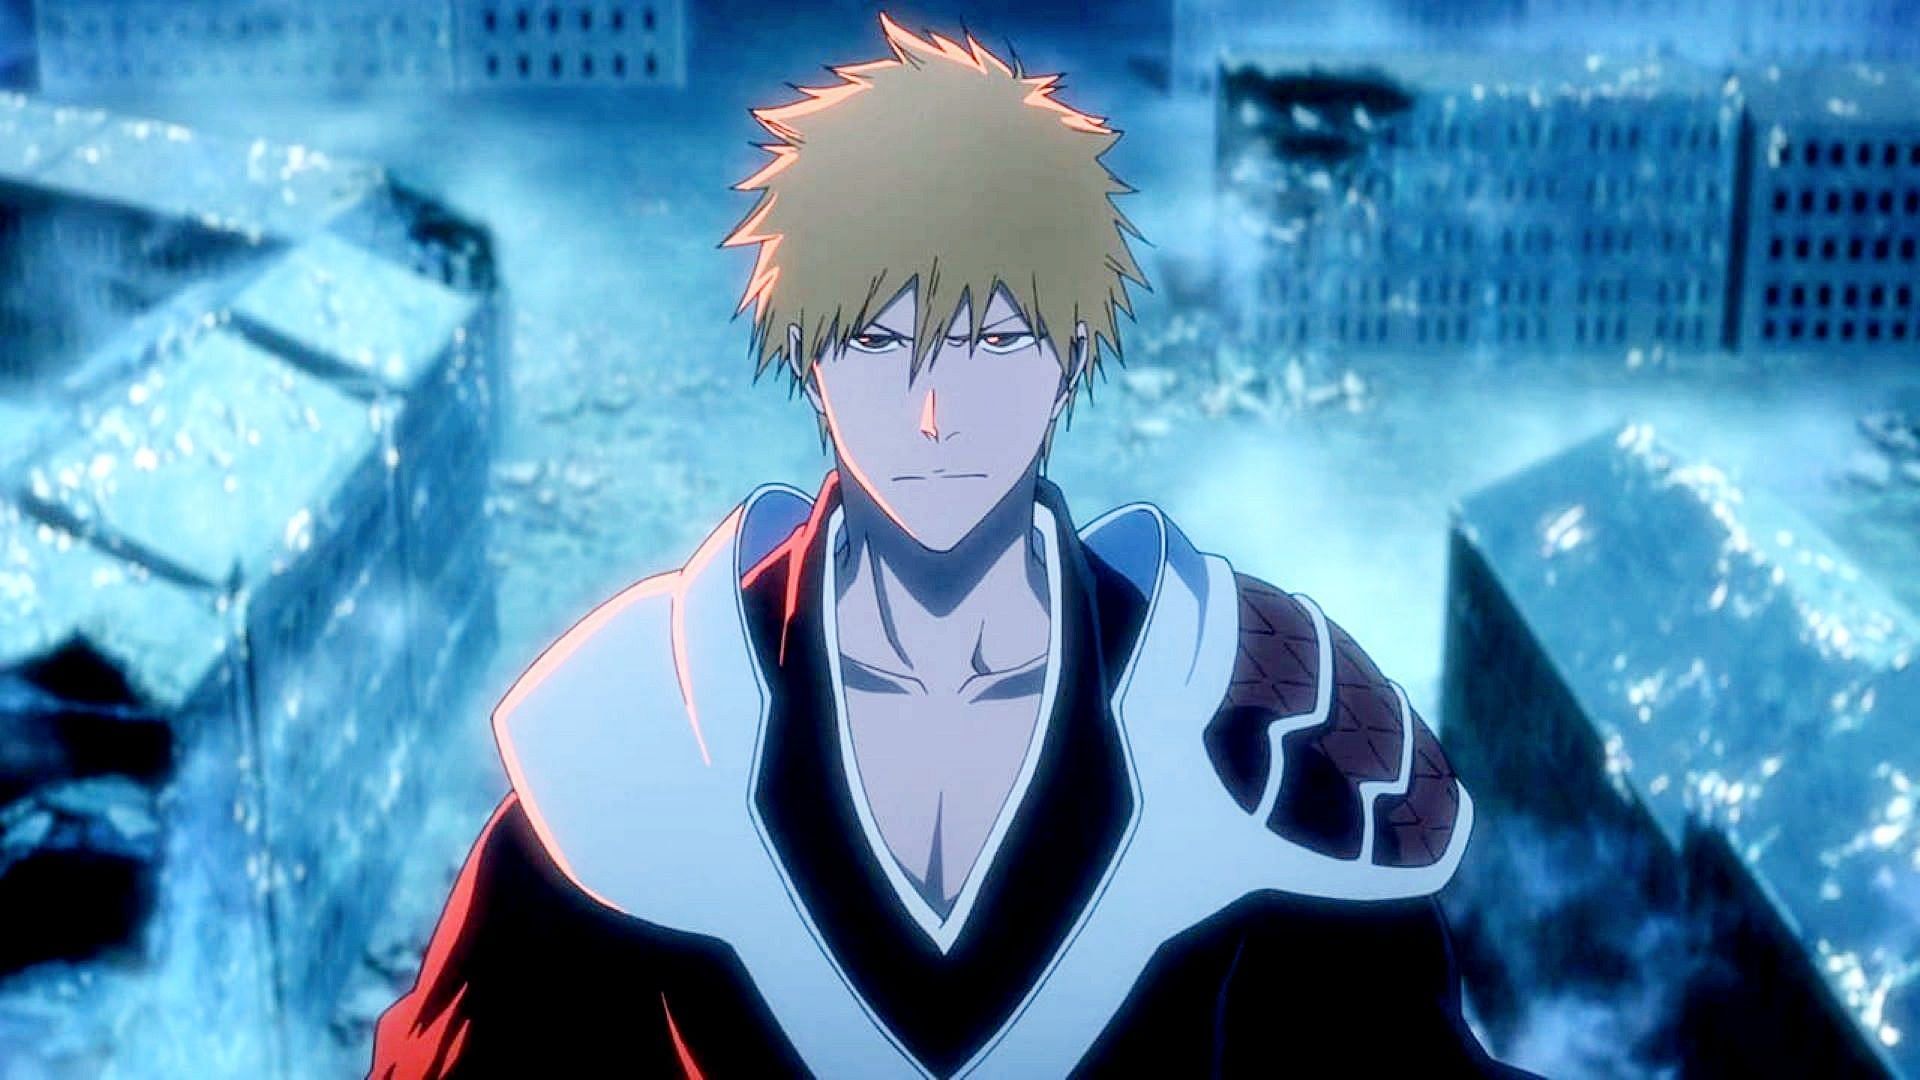 Bleach tybw the separation ep 9 cut out yuruichi and inoue part in